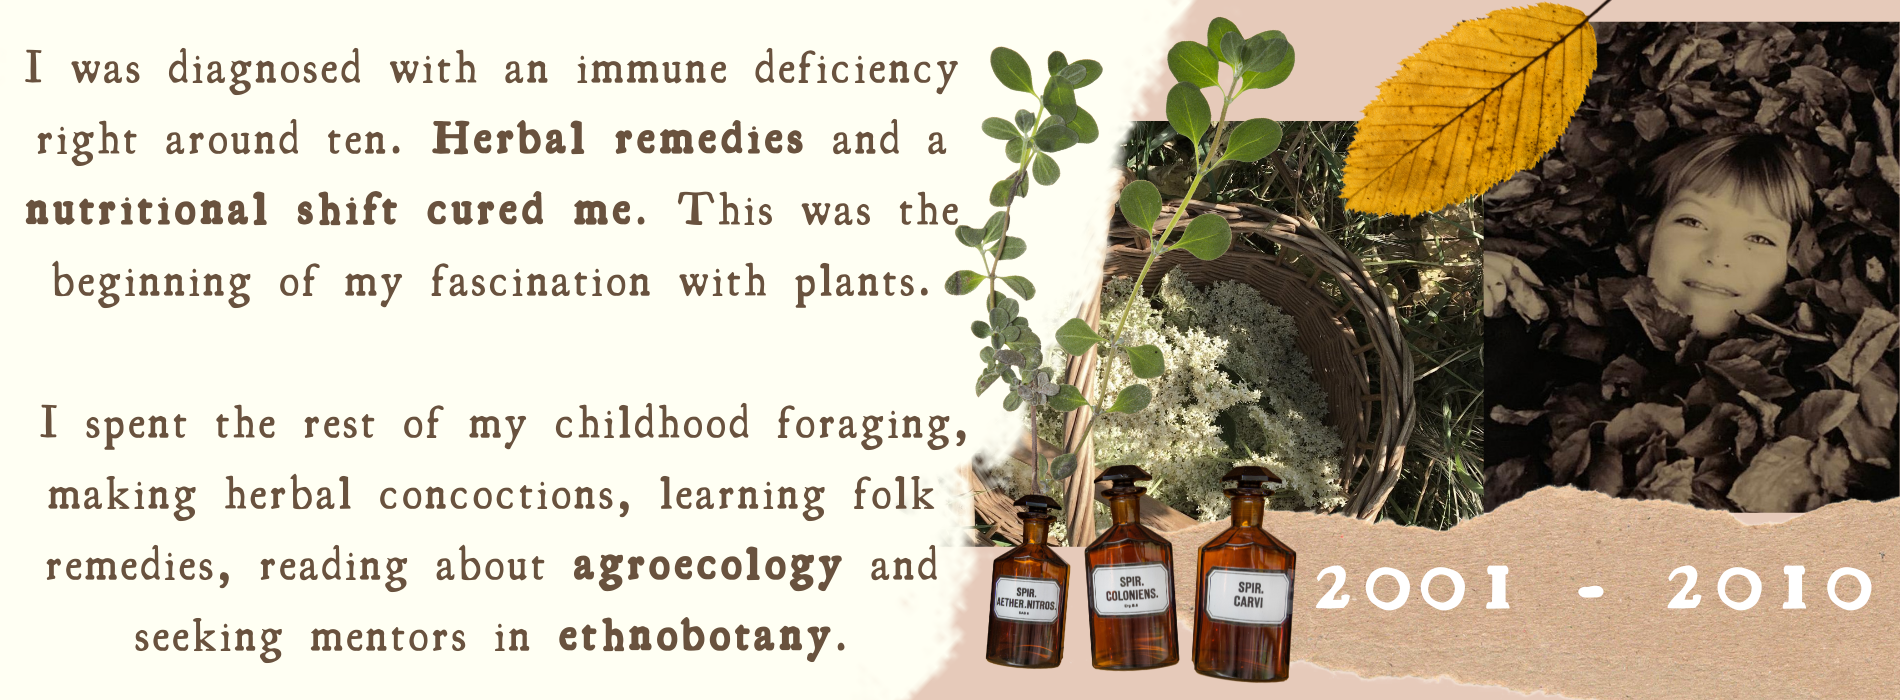 I was diagnosed with an immune deficiency right around ten. Herbal remedies and a nutritional shift cured me. This was the beginning of my fascination with plants.   I spent the rest of my childhood foraging, making herbal concoctions, learning folk remedies, reading about agroecology and seeking mentors in ethnobotany.